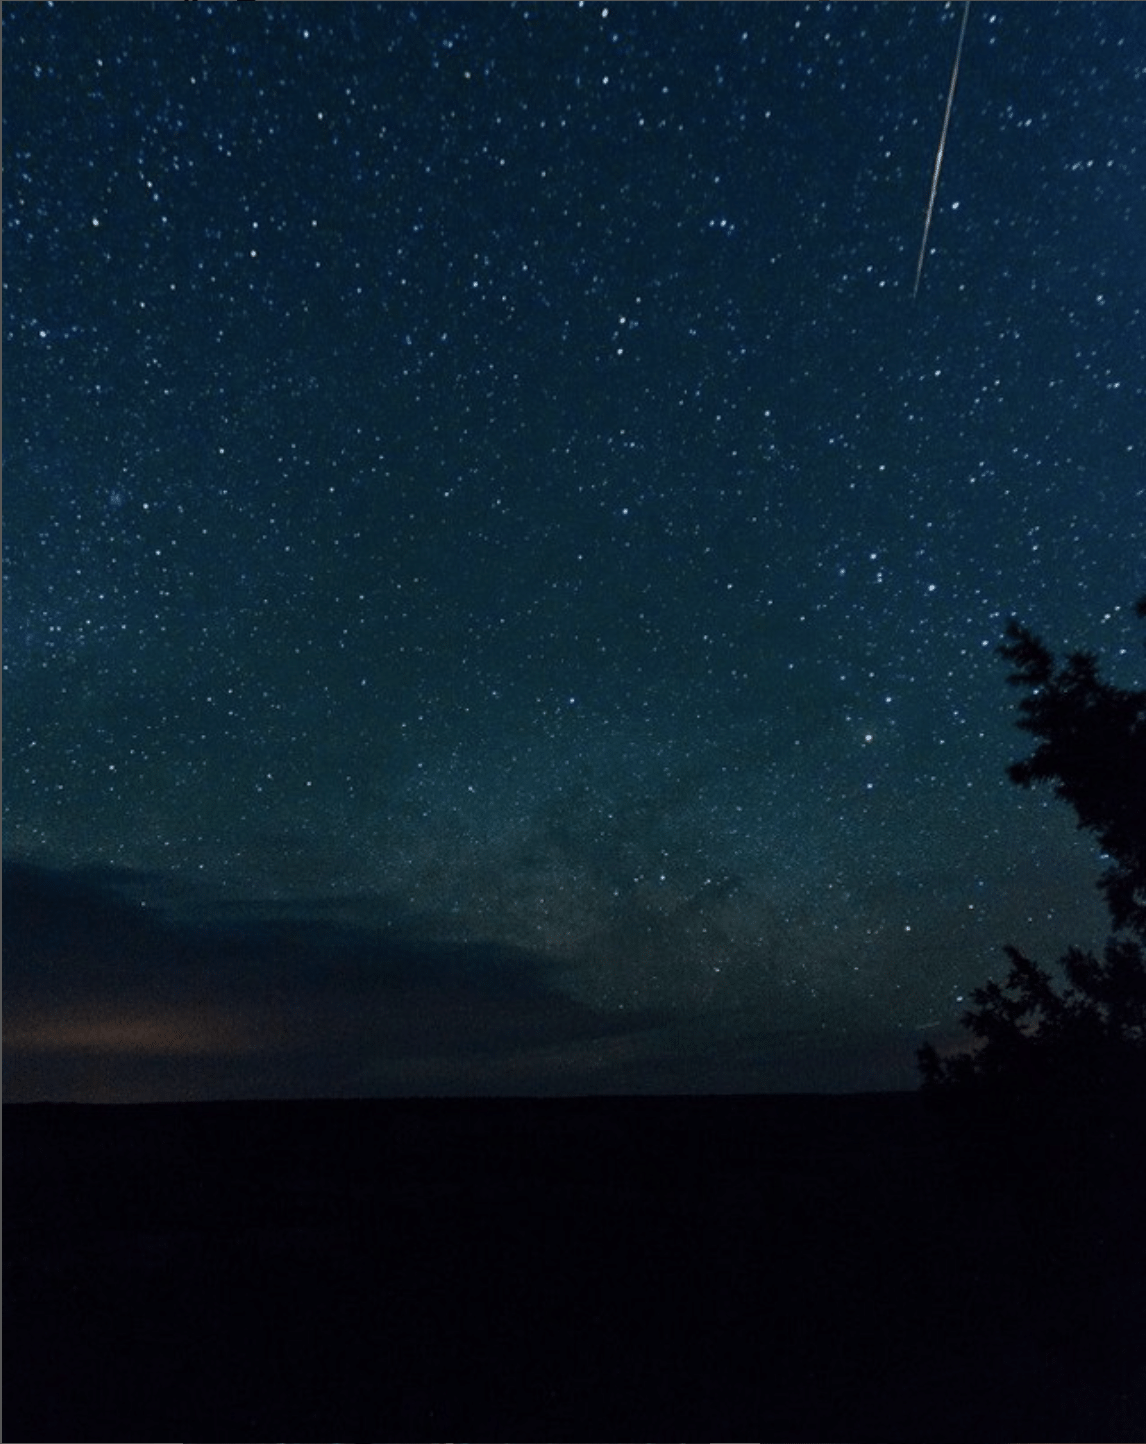 Eta Aquarids: record of the meteor shower from Halley's comet in Arizona/United States - Charles Byrne